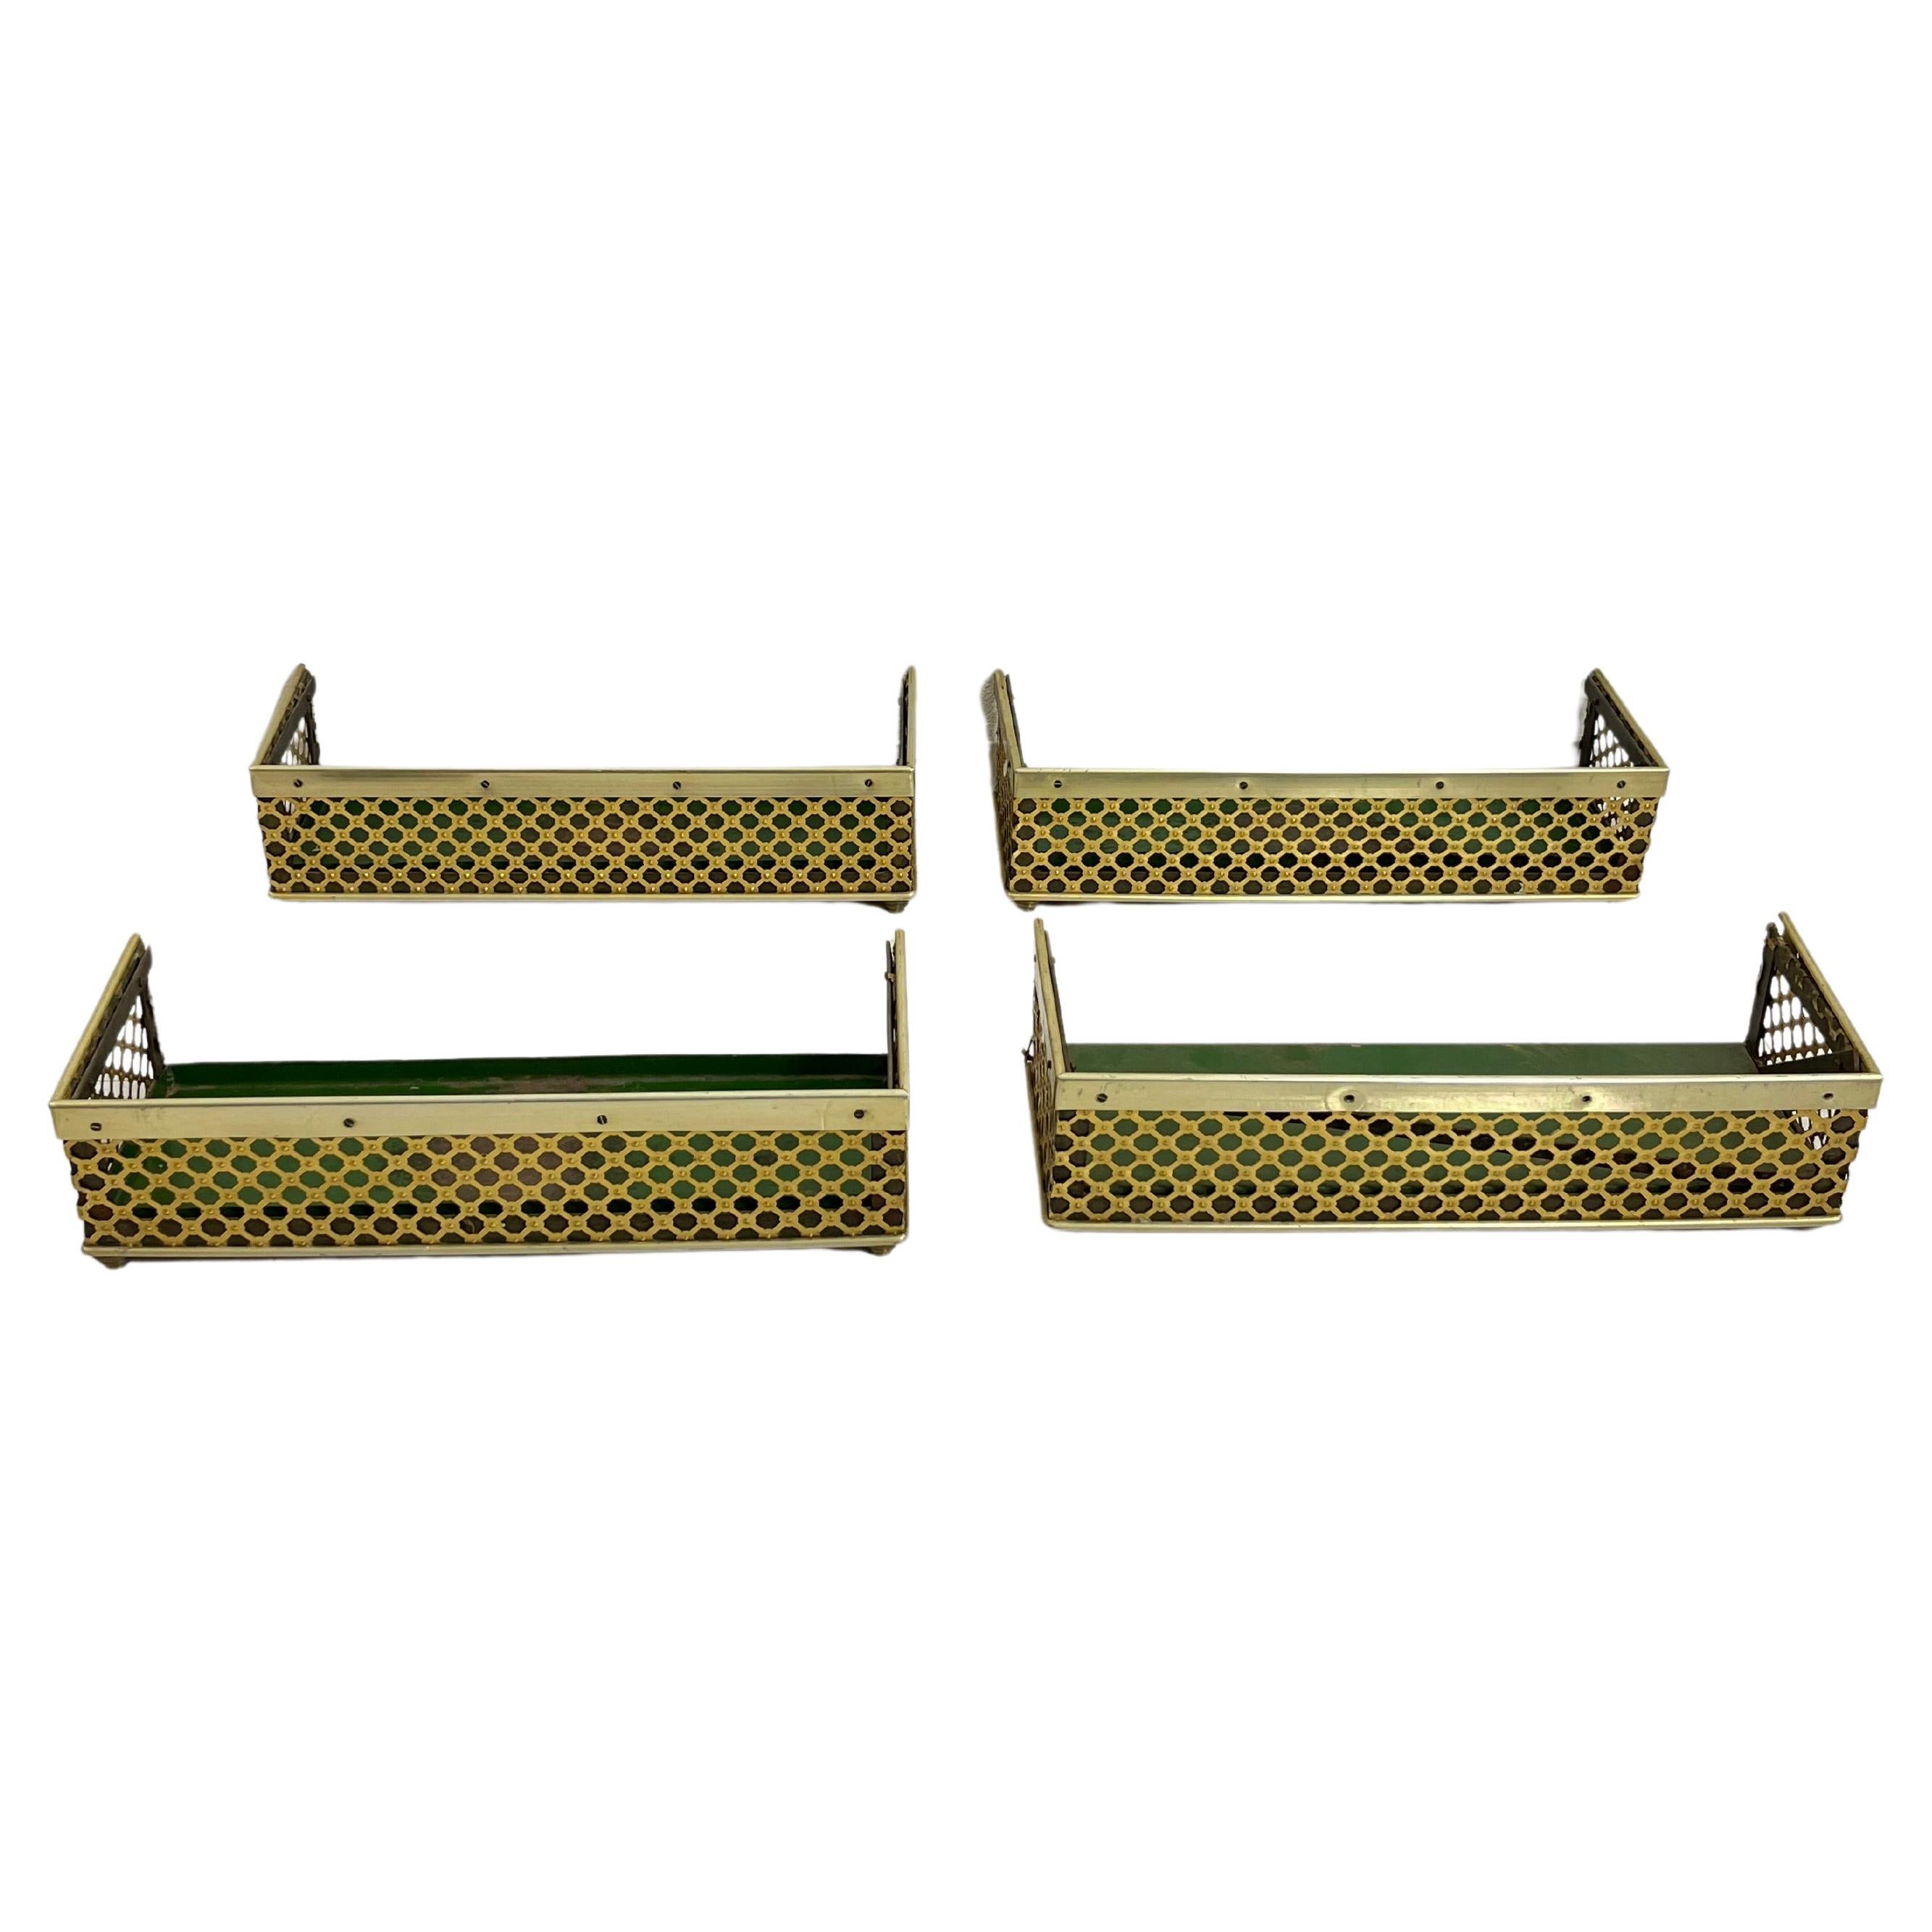 Set of 4 Mid-Century Brass-Covered Planters Attributed to Gio Ponti 1950s For Sale